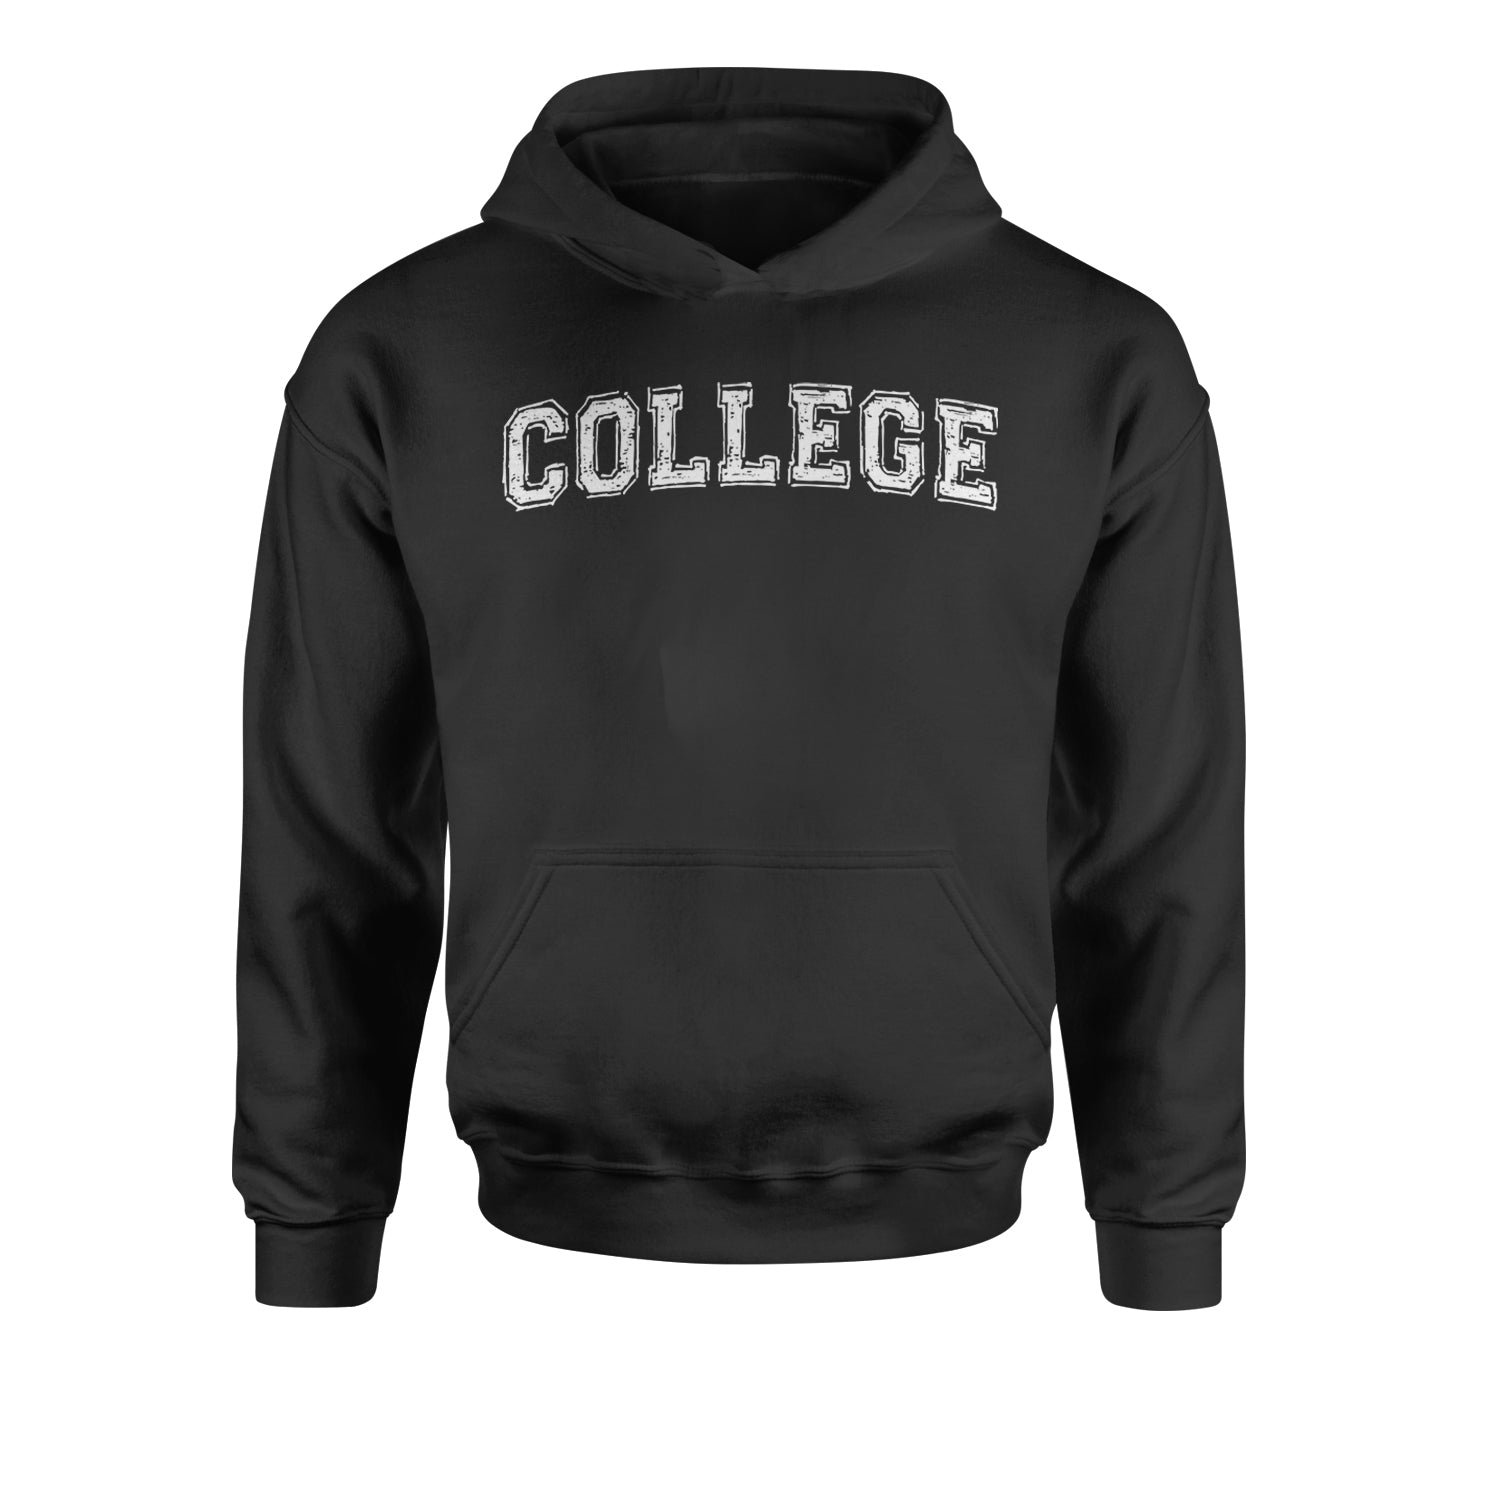 College Belushi Frat House Party Bluto Tribute Animal Youth-Sized Hoodie